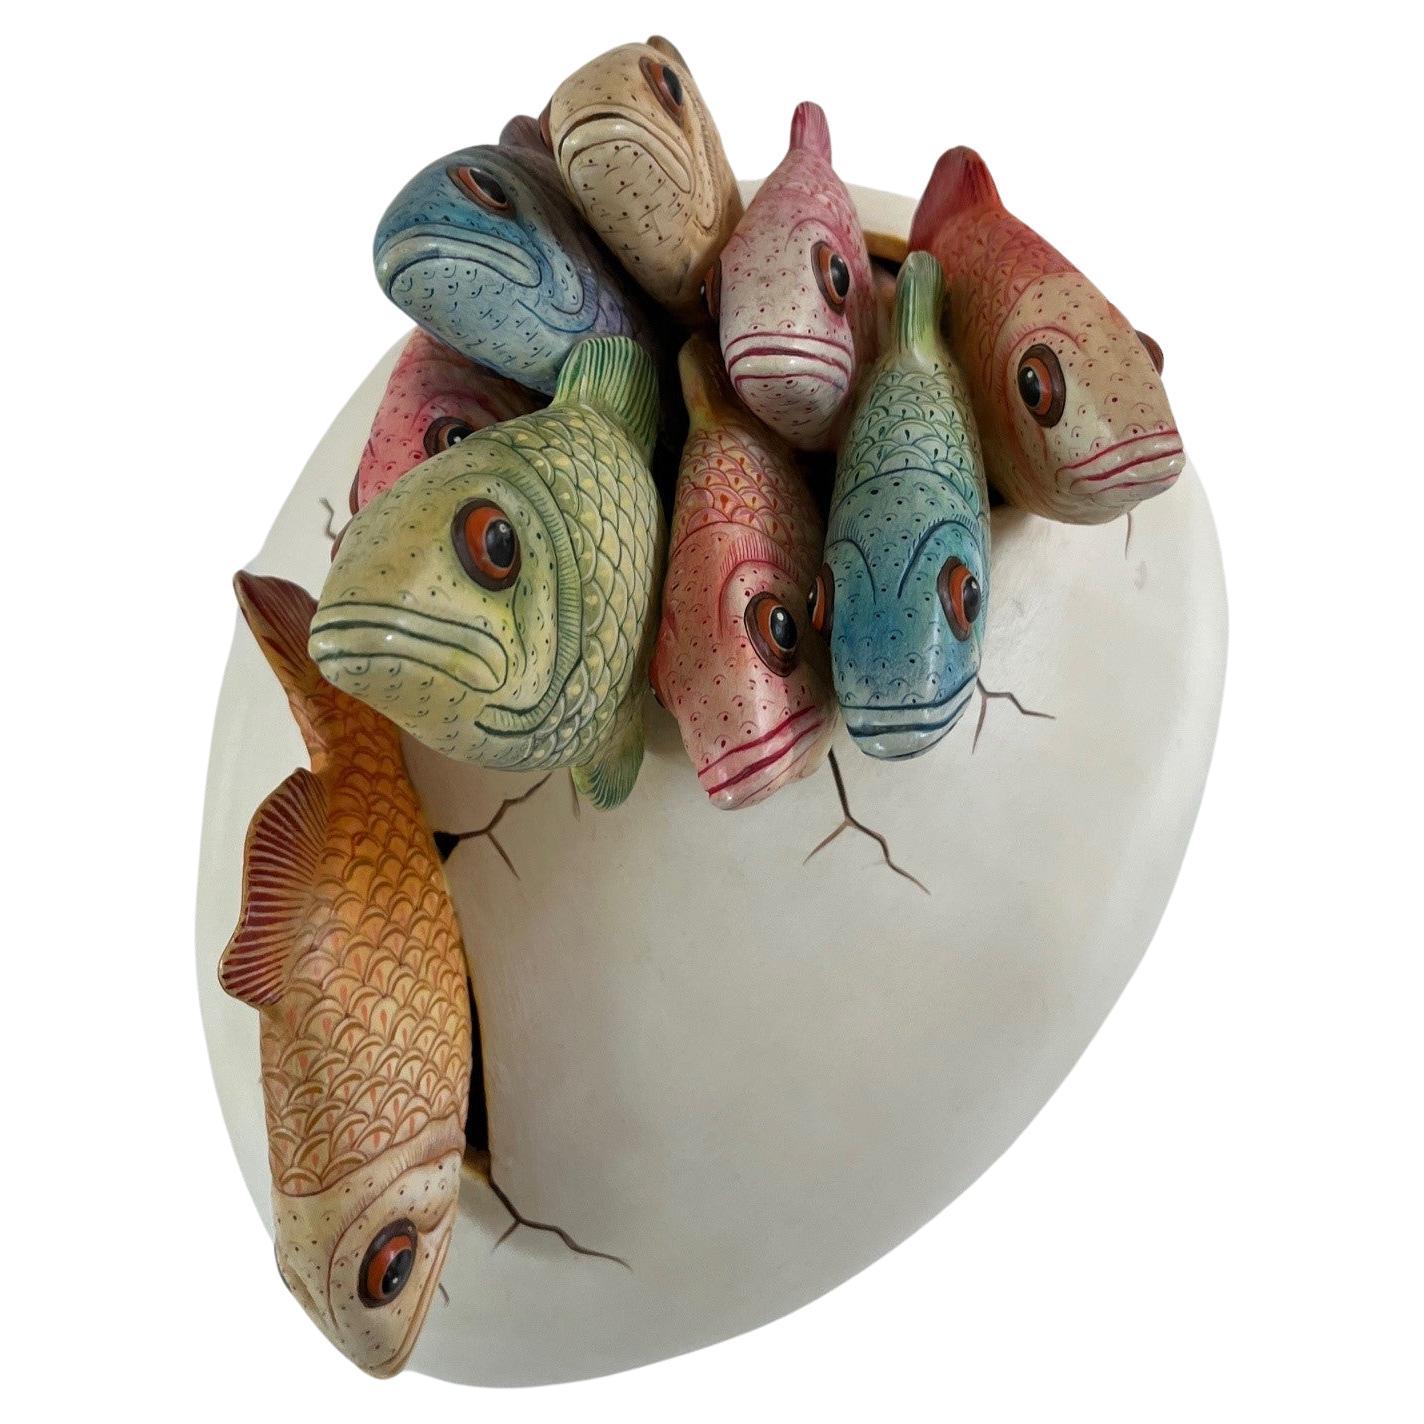 Vintage Large Hatching Fish Egg Sculpture Figuring, Nine Colorful Fish Figuring Sticking out of an Egg with Cracks by the Artist Sergio Bustamente, circa: 1950s. 